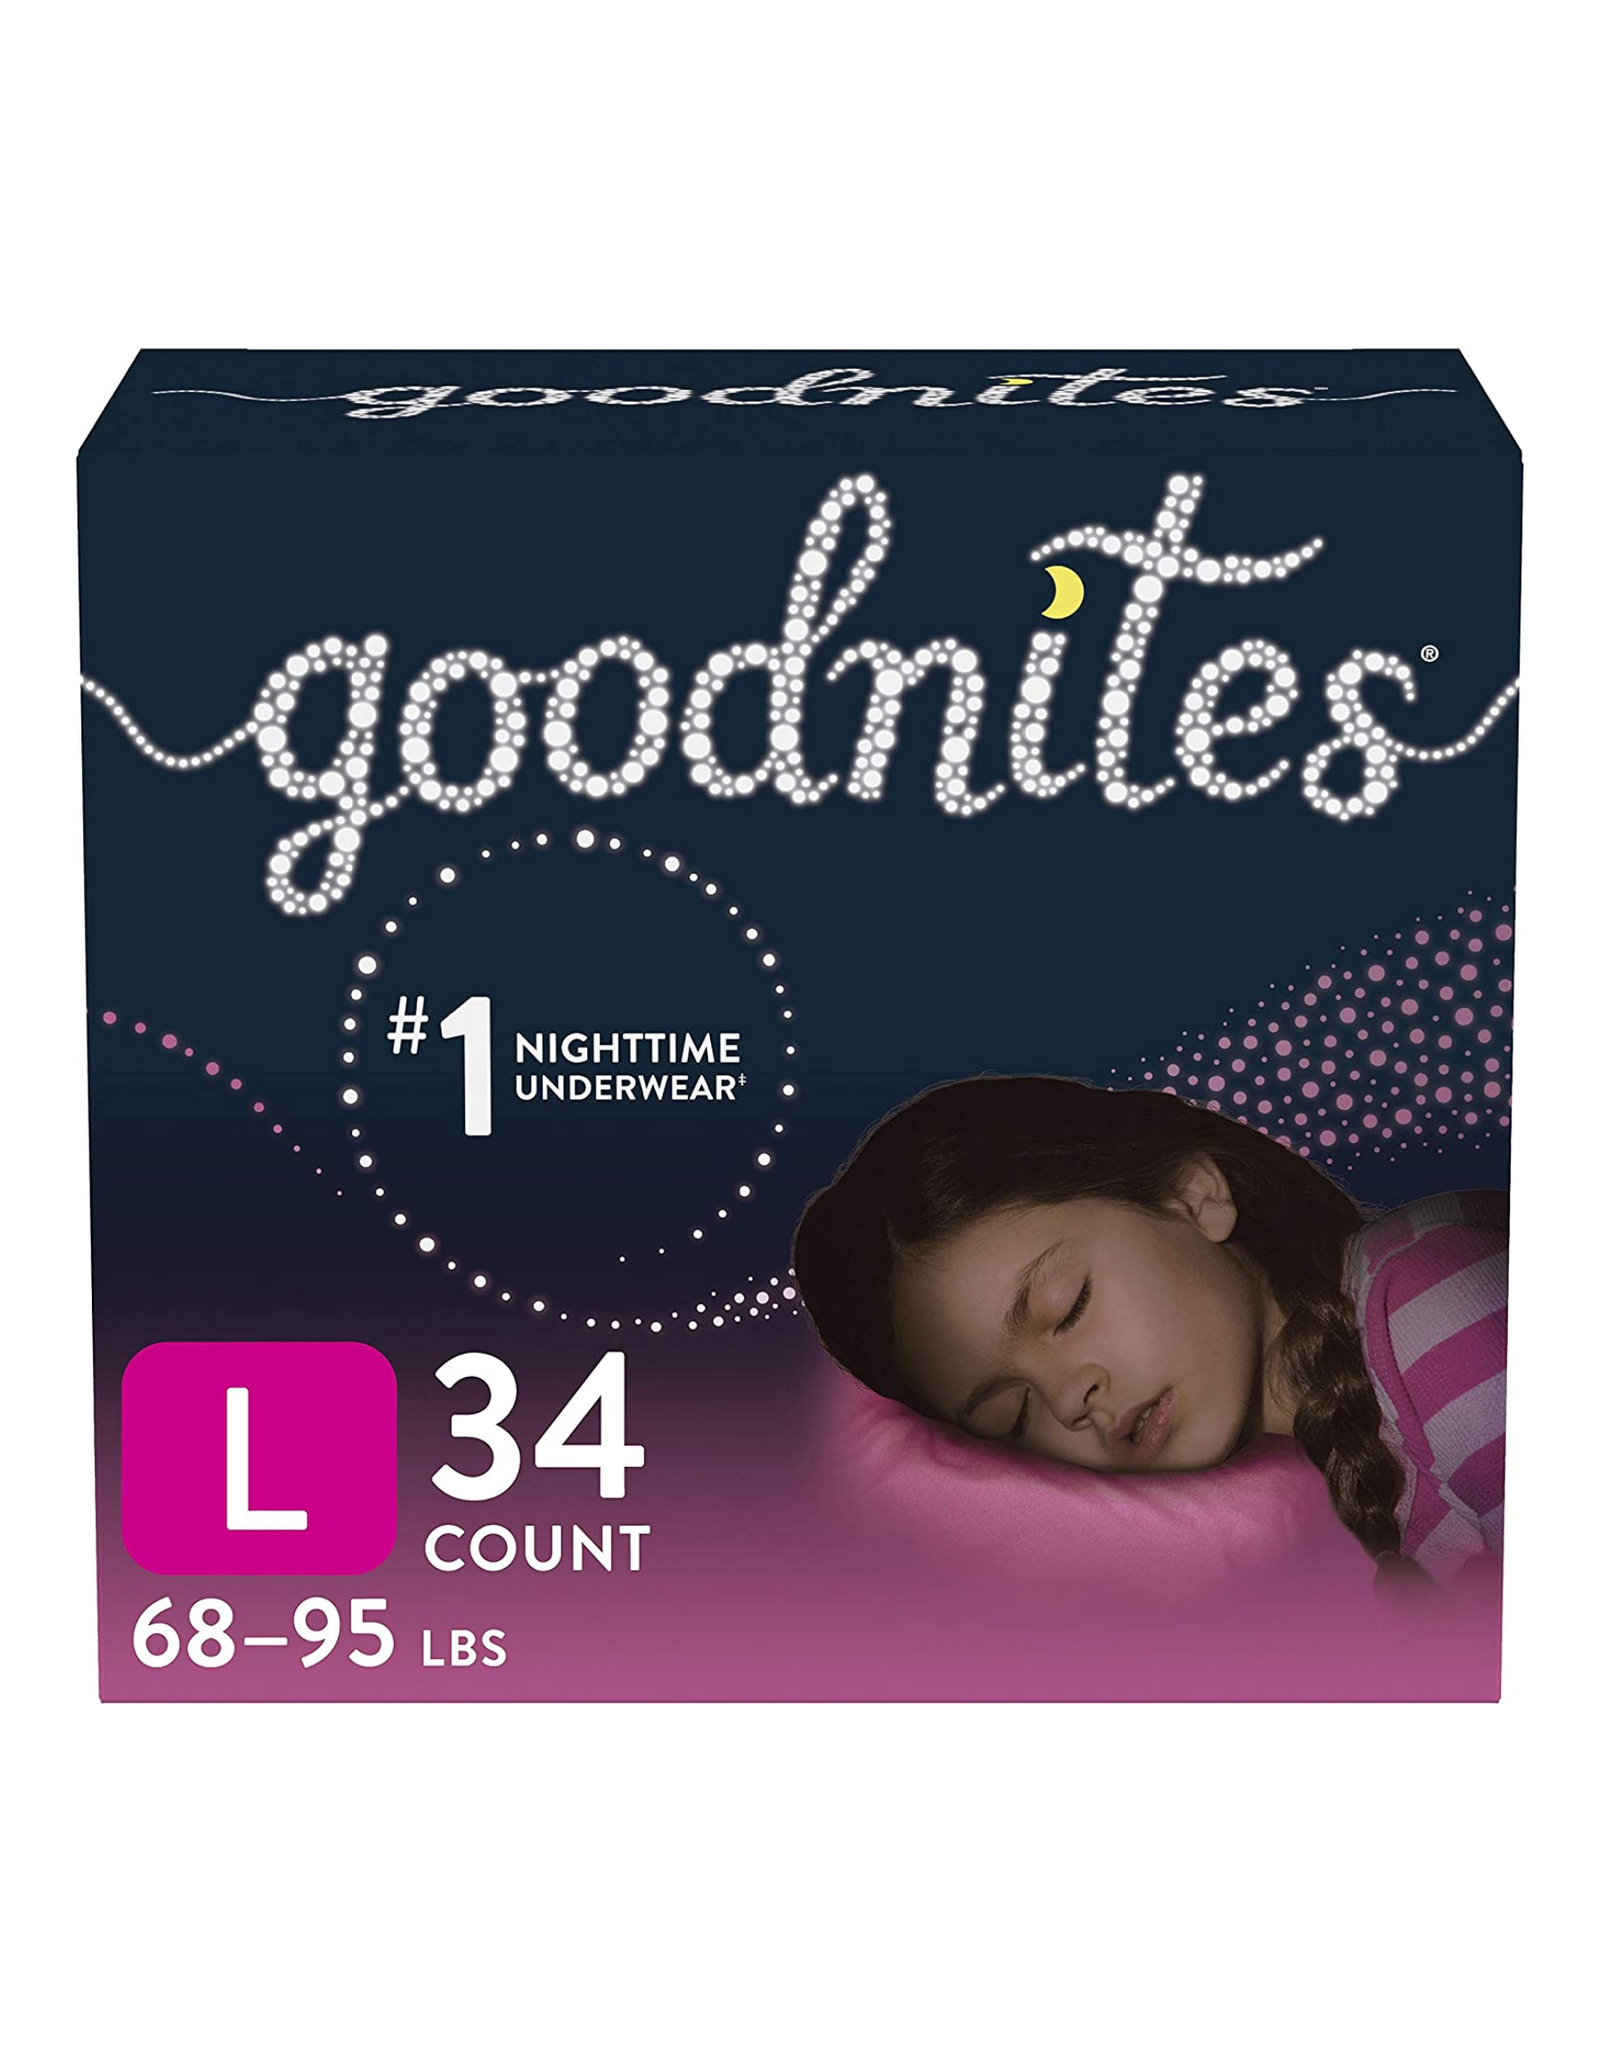 Goodnites Nighttime Bedwetting Underwear For Girls, Large, 34 Ct, 68-95 lb.